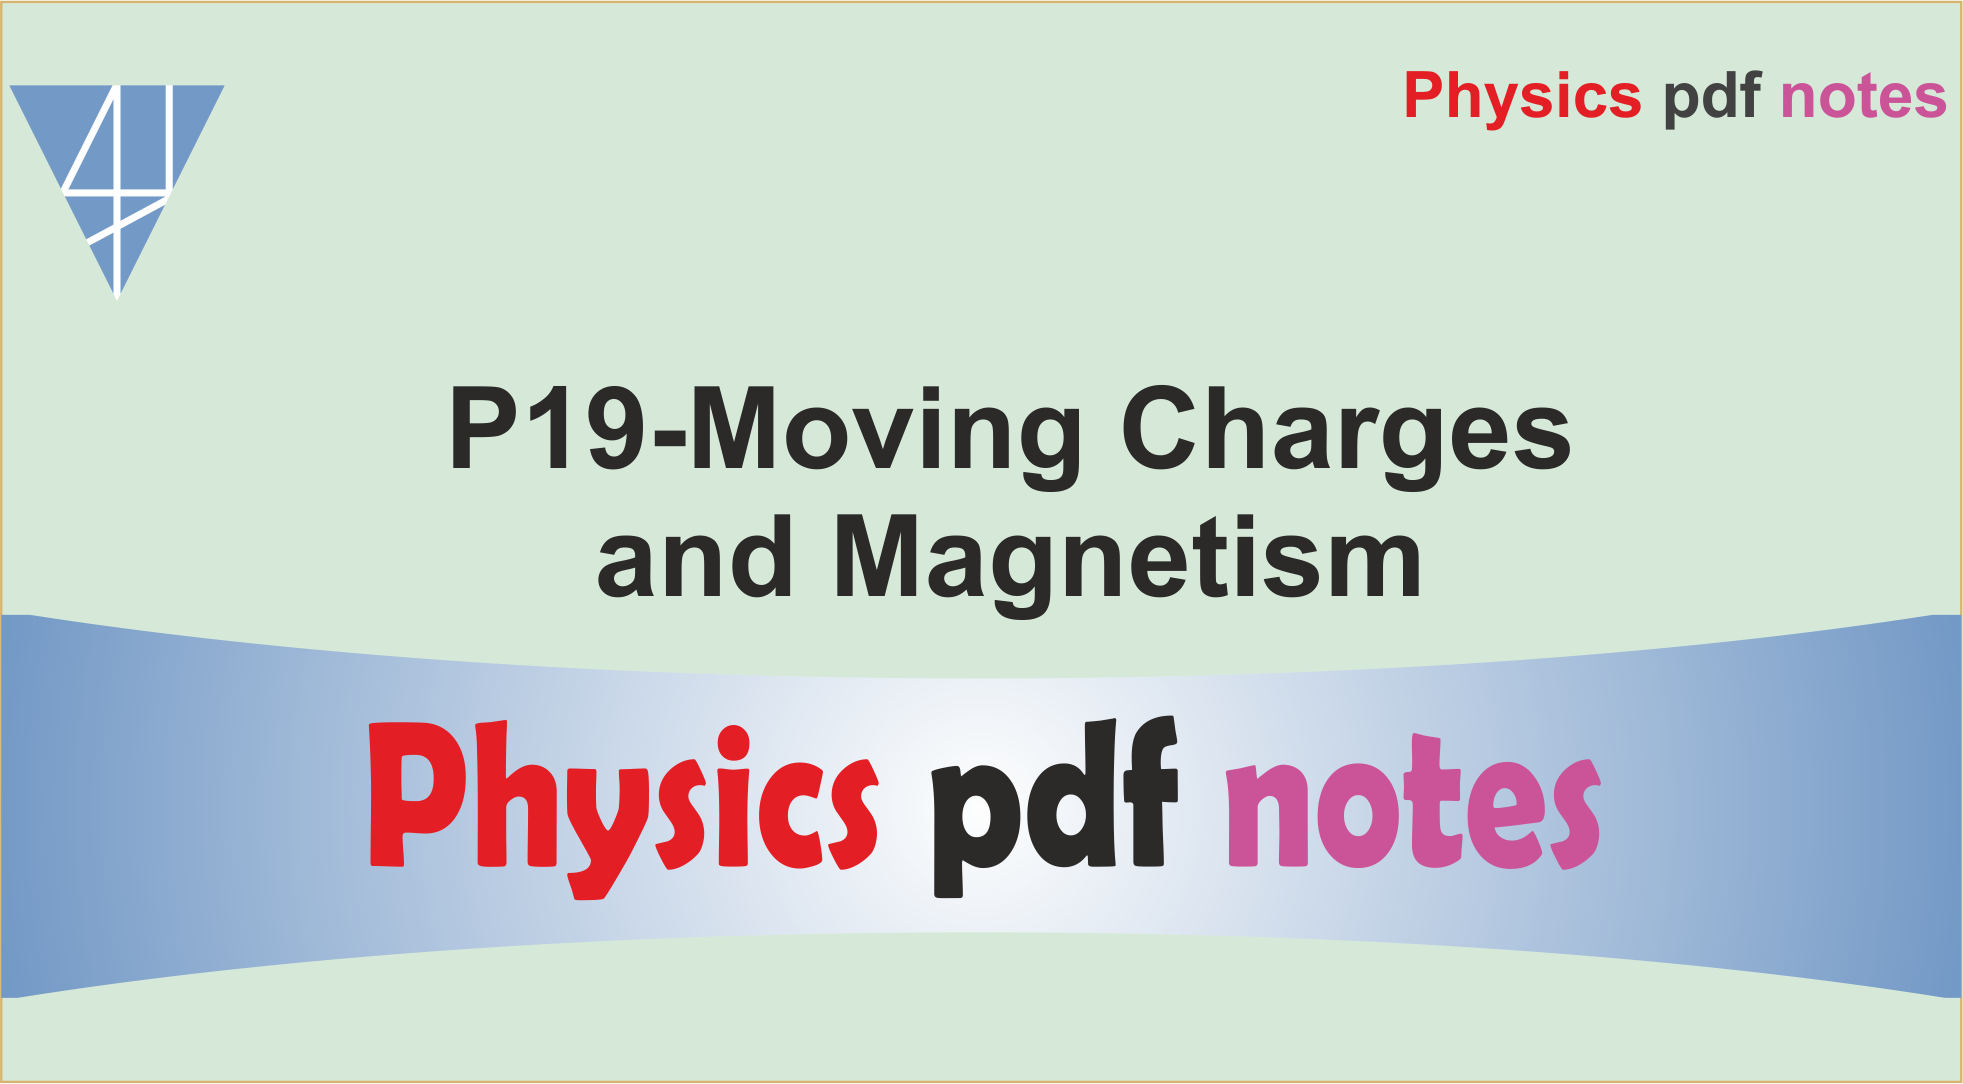 P19-Moving Charges & Magnetism